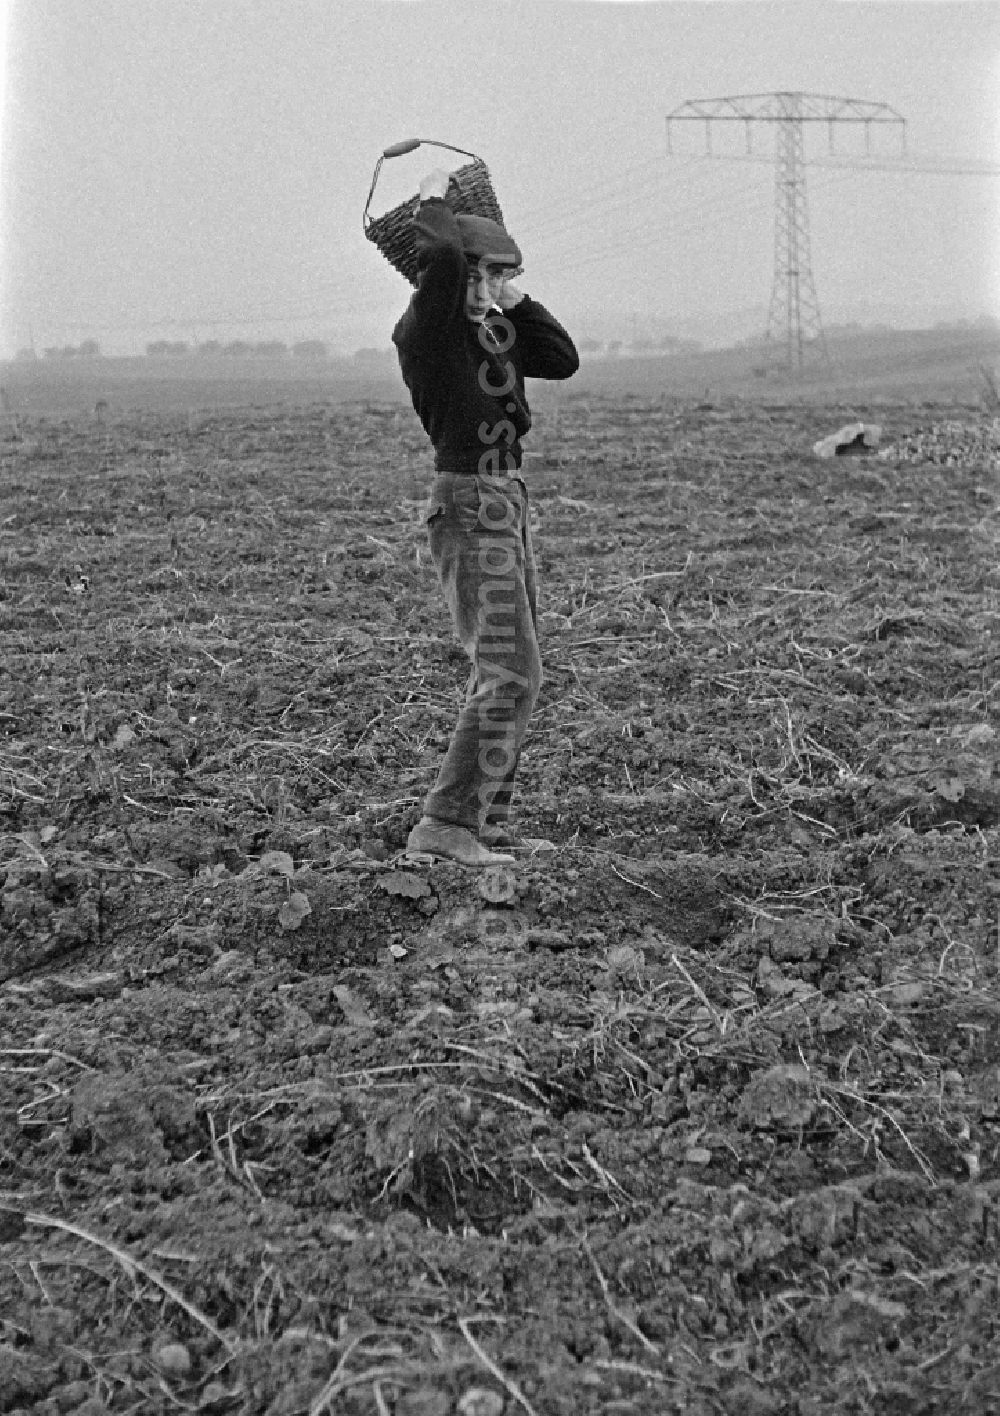 GDR photo archive: Werneuchen - Potato harvesting in a field by 9th grade students in Werneuchen, Brandenburg in the territory of the former GDR, German Democratic Republic